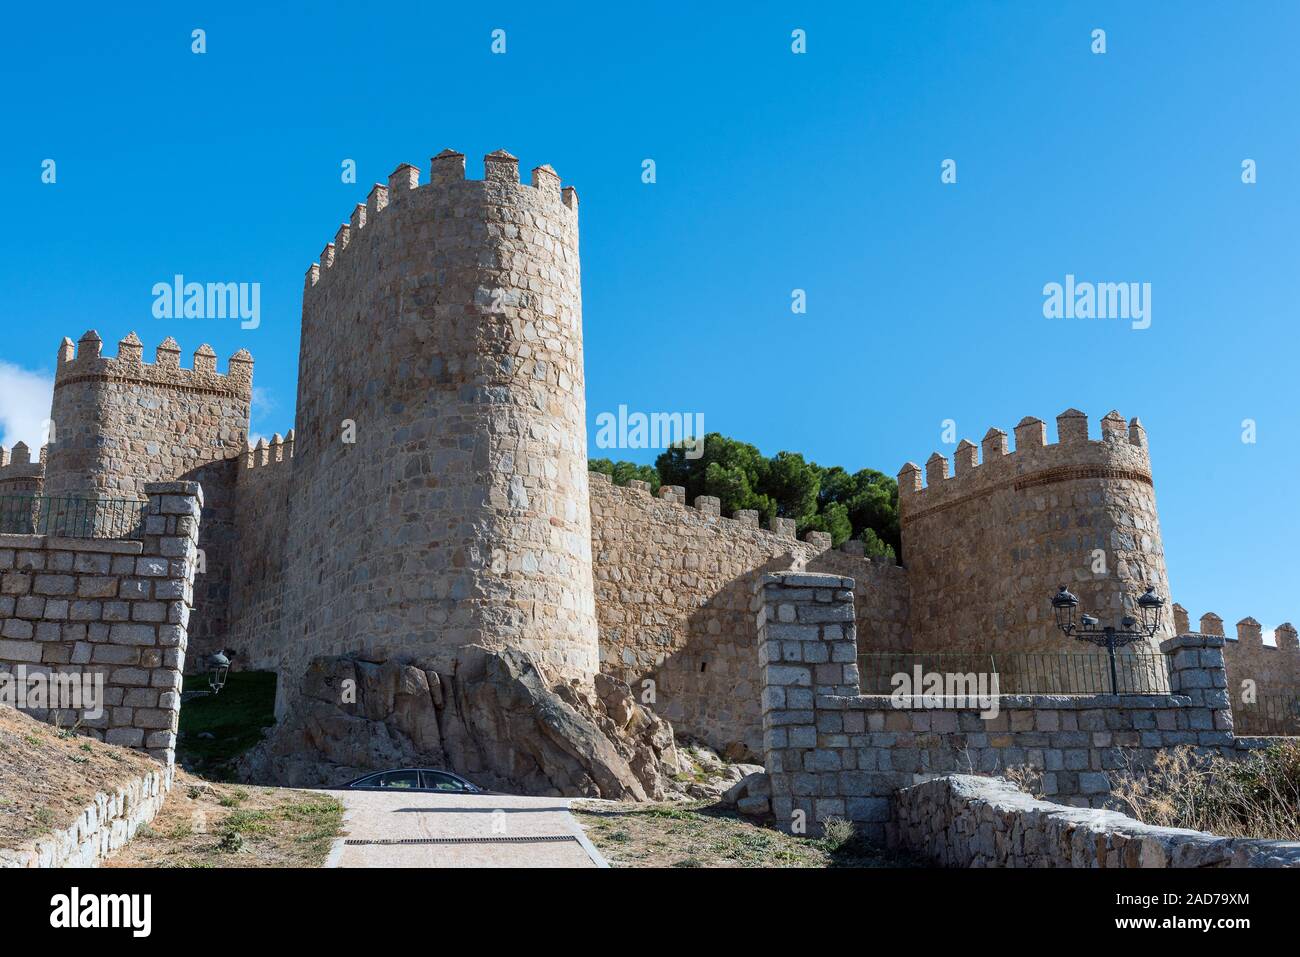 The imposing medieval city wall of Avila in Spain Stock Photo